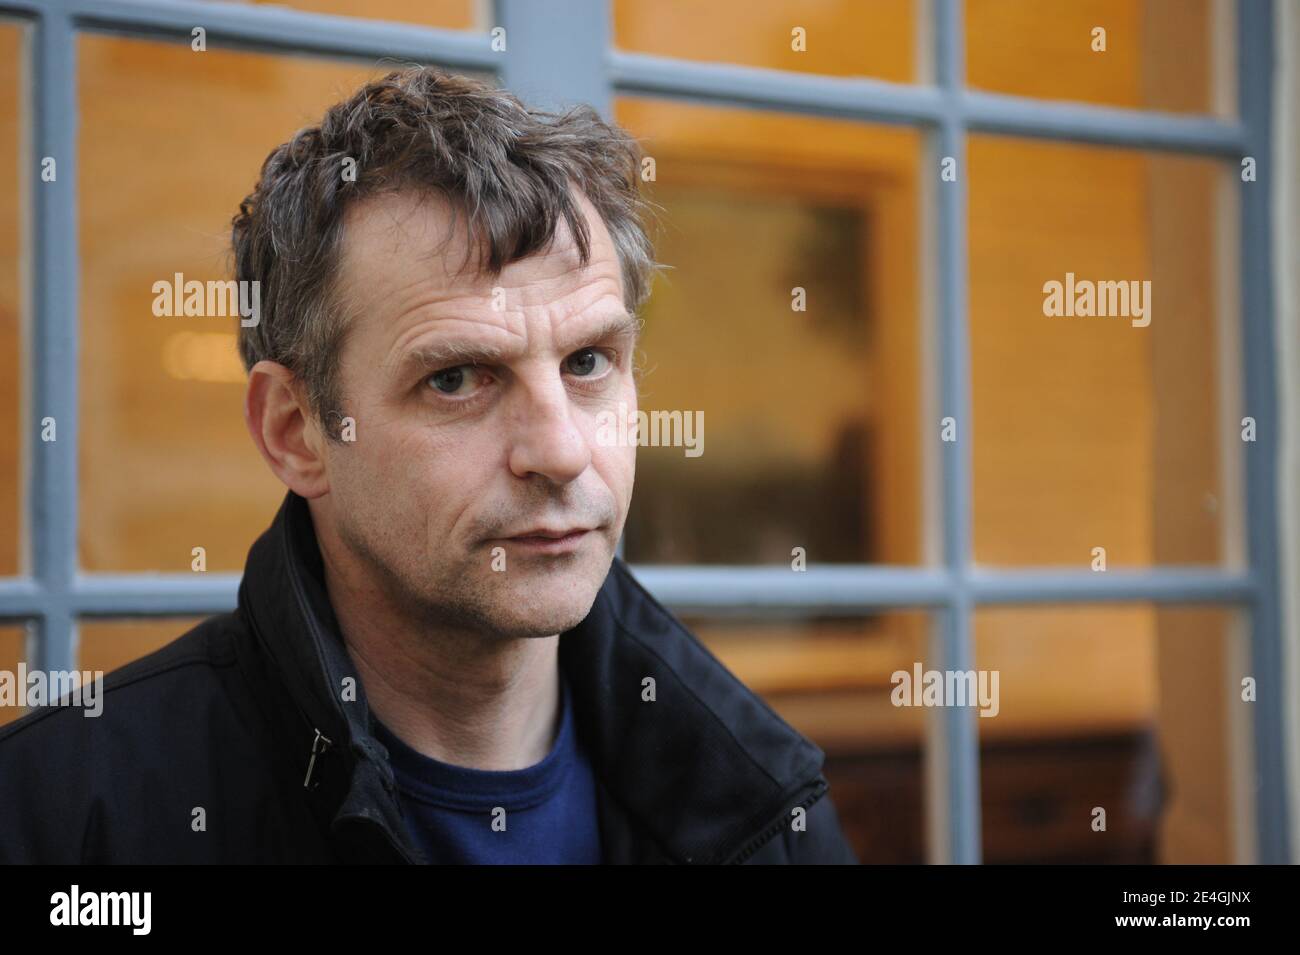 French director Lucas Belvaux during a photocall to present his last movie 'Rapt', in Lille, North of France on November 13, 2009. Photo by Farid Alouache/ABACAPRESS.COM Stock Photo